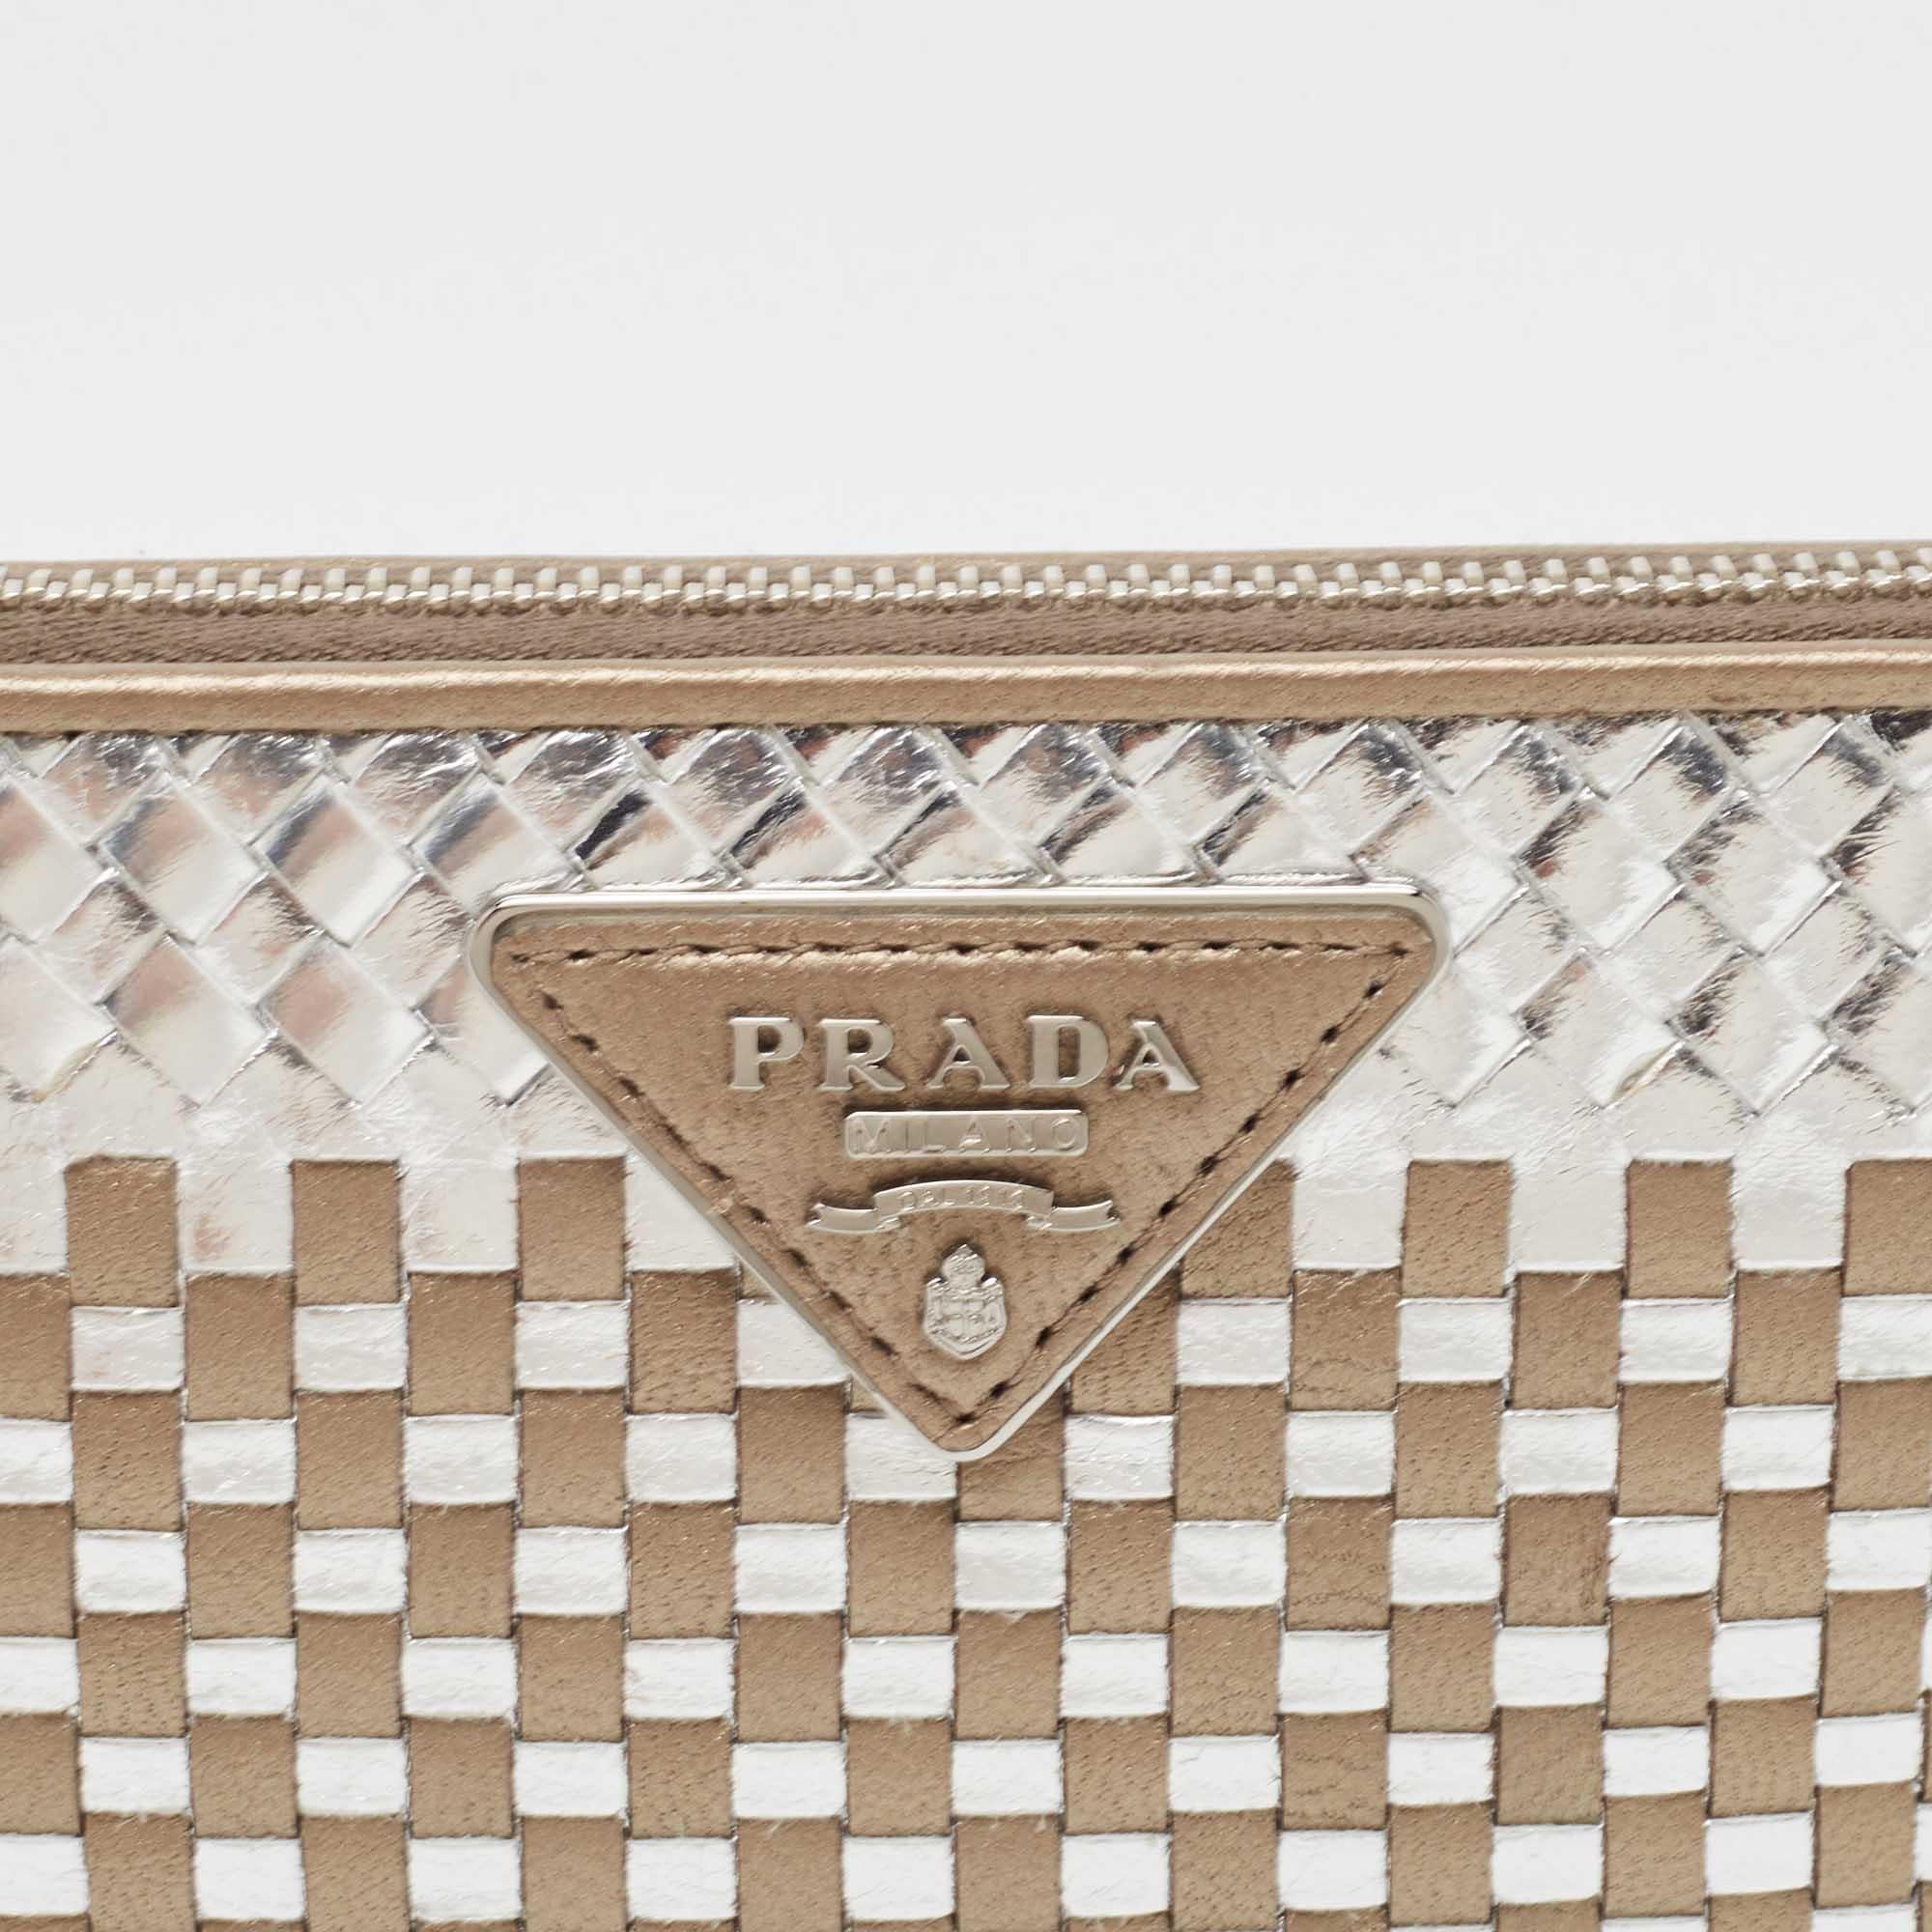 This Prada wallet is a great everyday accessory. It is made from quality materials on the exterior and features a compartmentalized interior.

